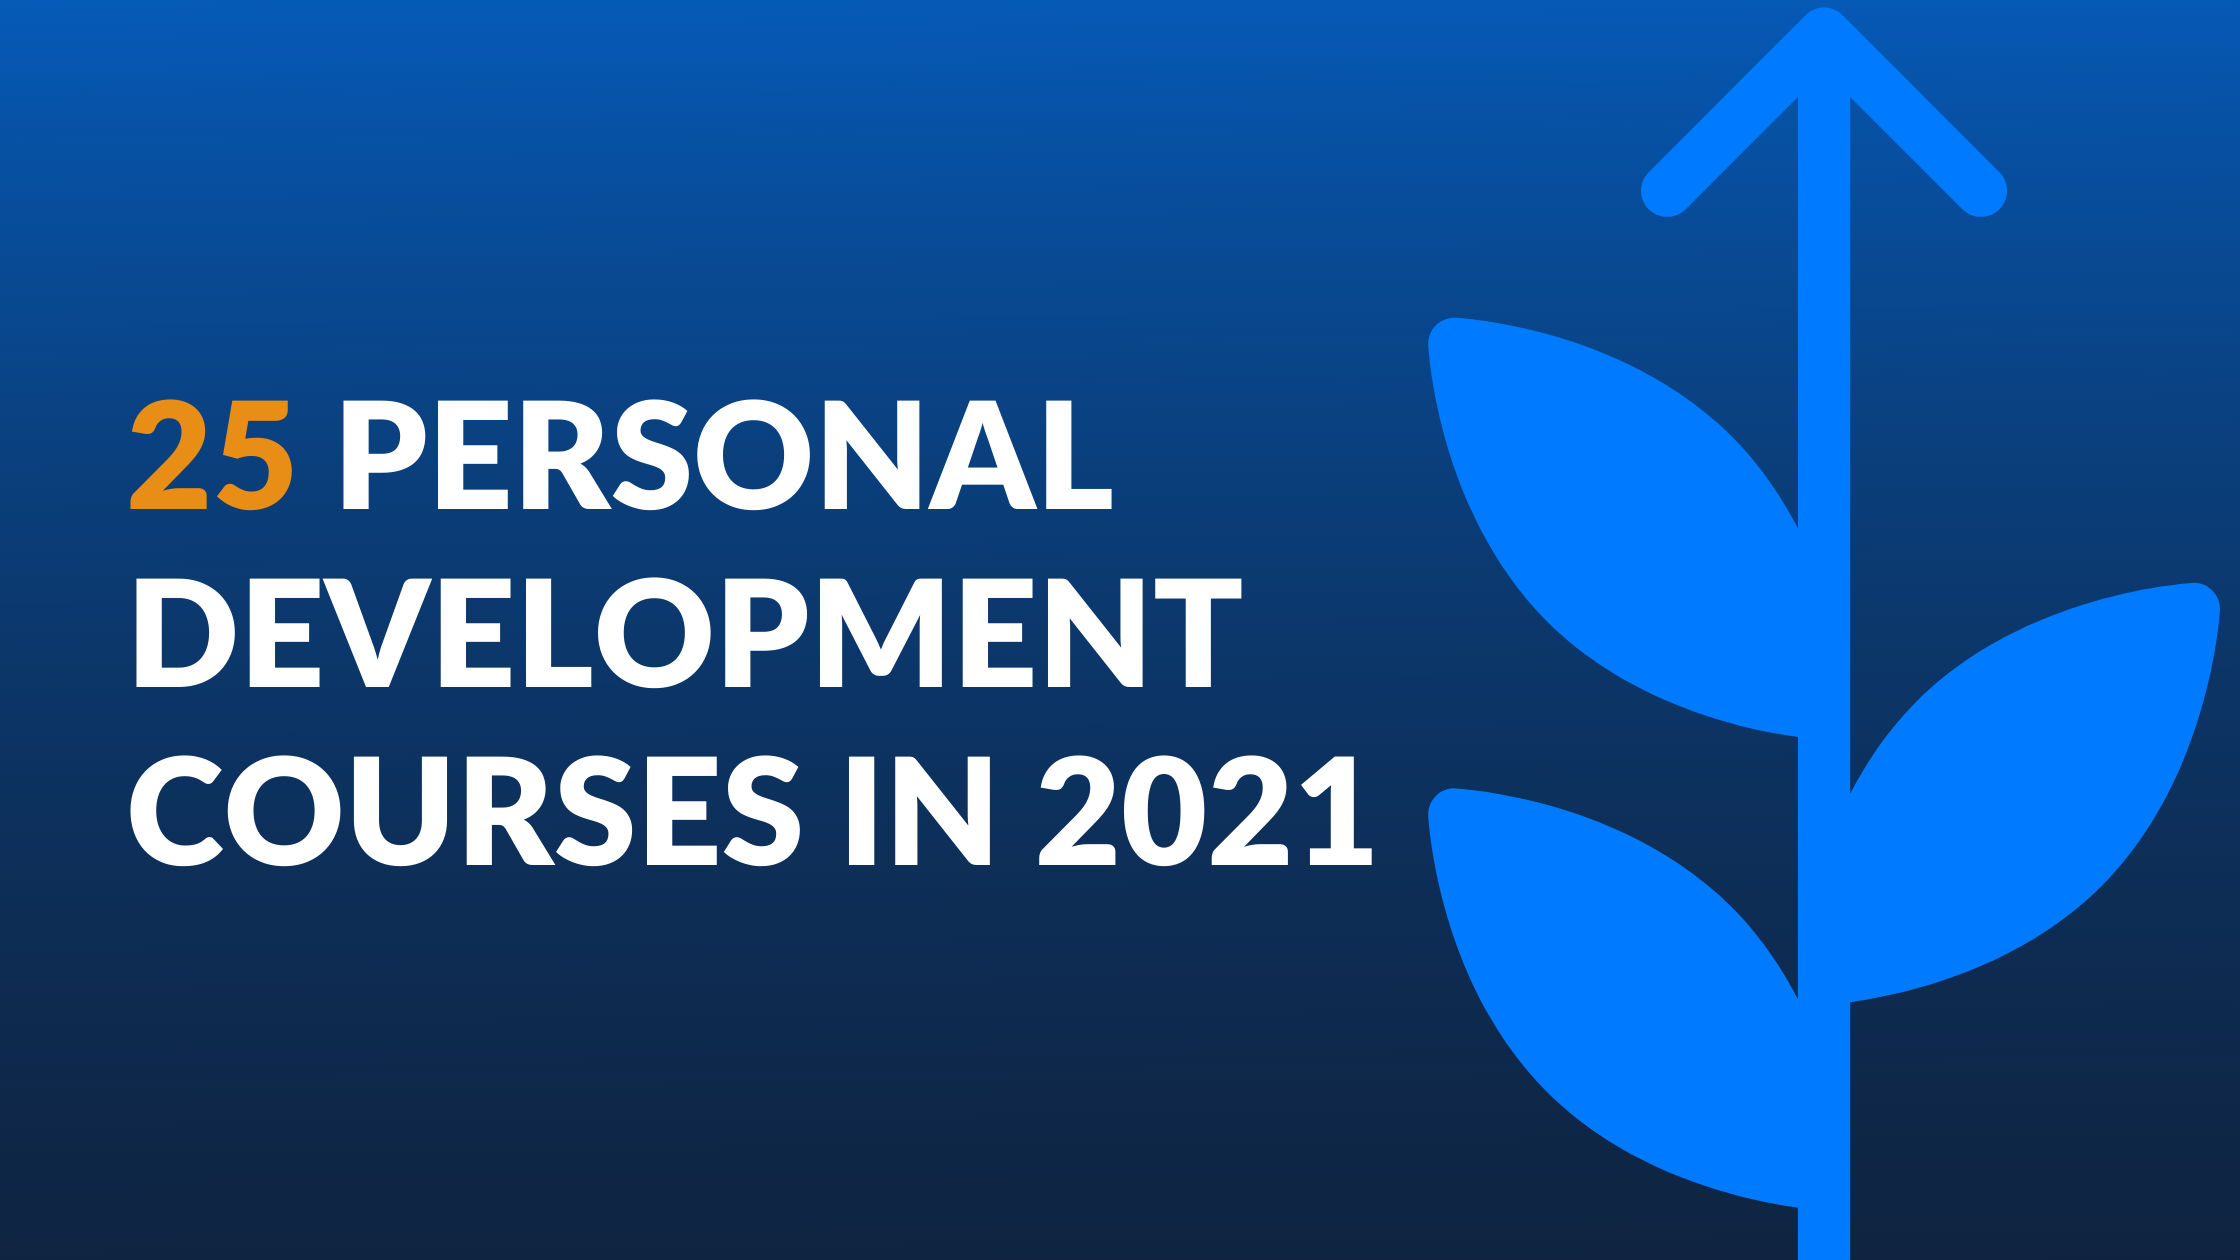 25 Personal Development Courses in 2021